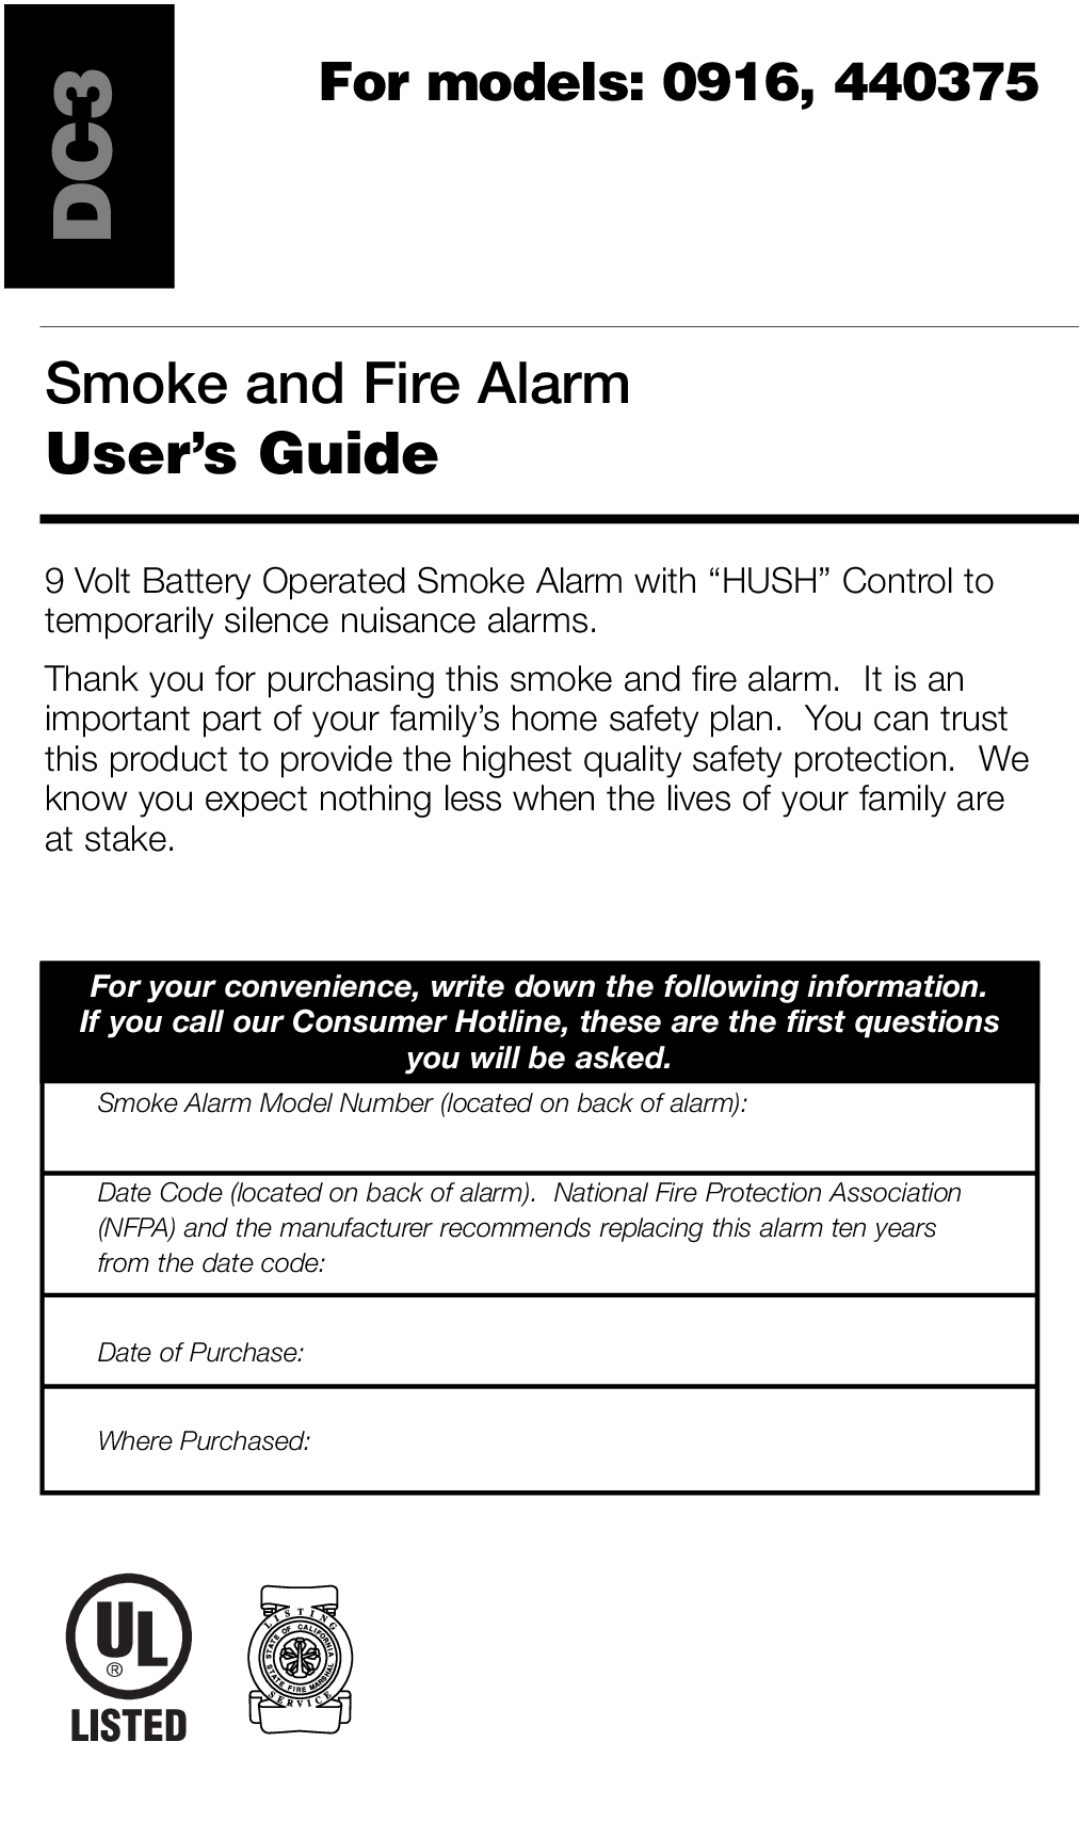 Kidde 440375 manual Smoke and Fire Alarm, User’s Guide, For models 0916, Listed 